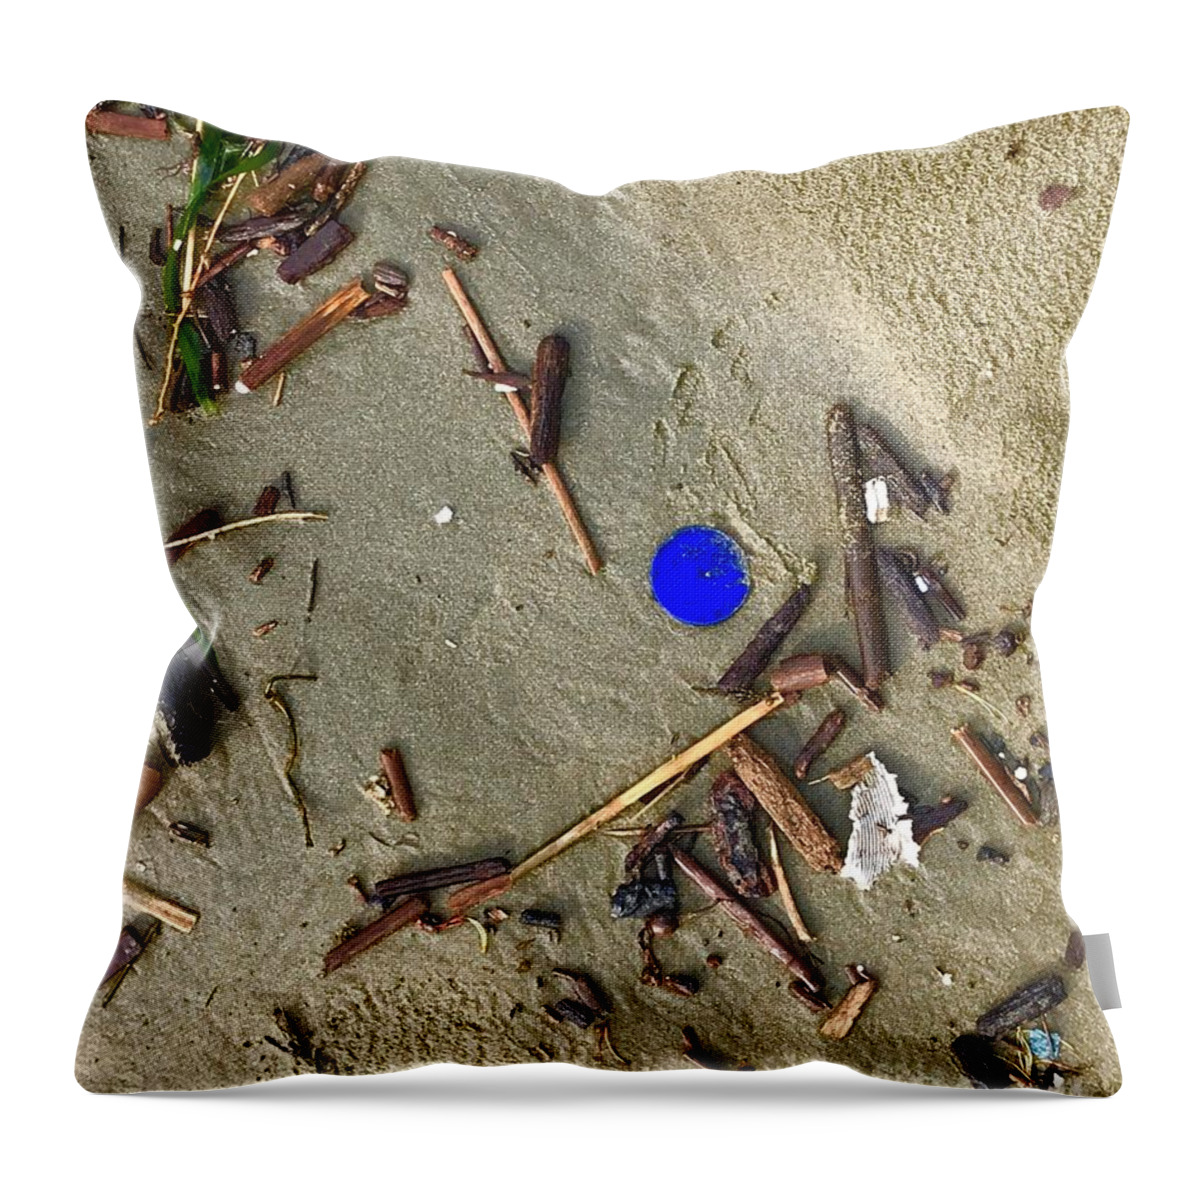 Blue Throw Pillow featuring the photograph Blue Plastic on Sand by Suzanne Lorenz